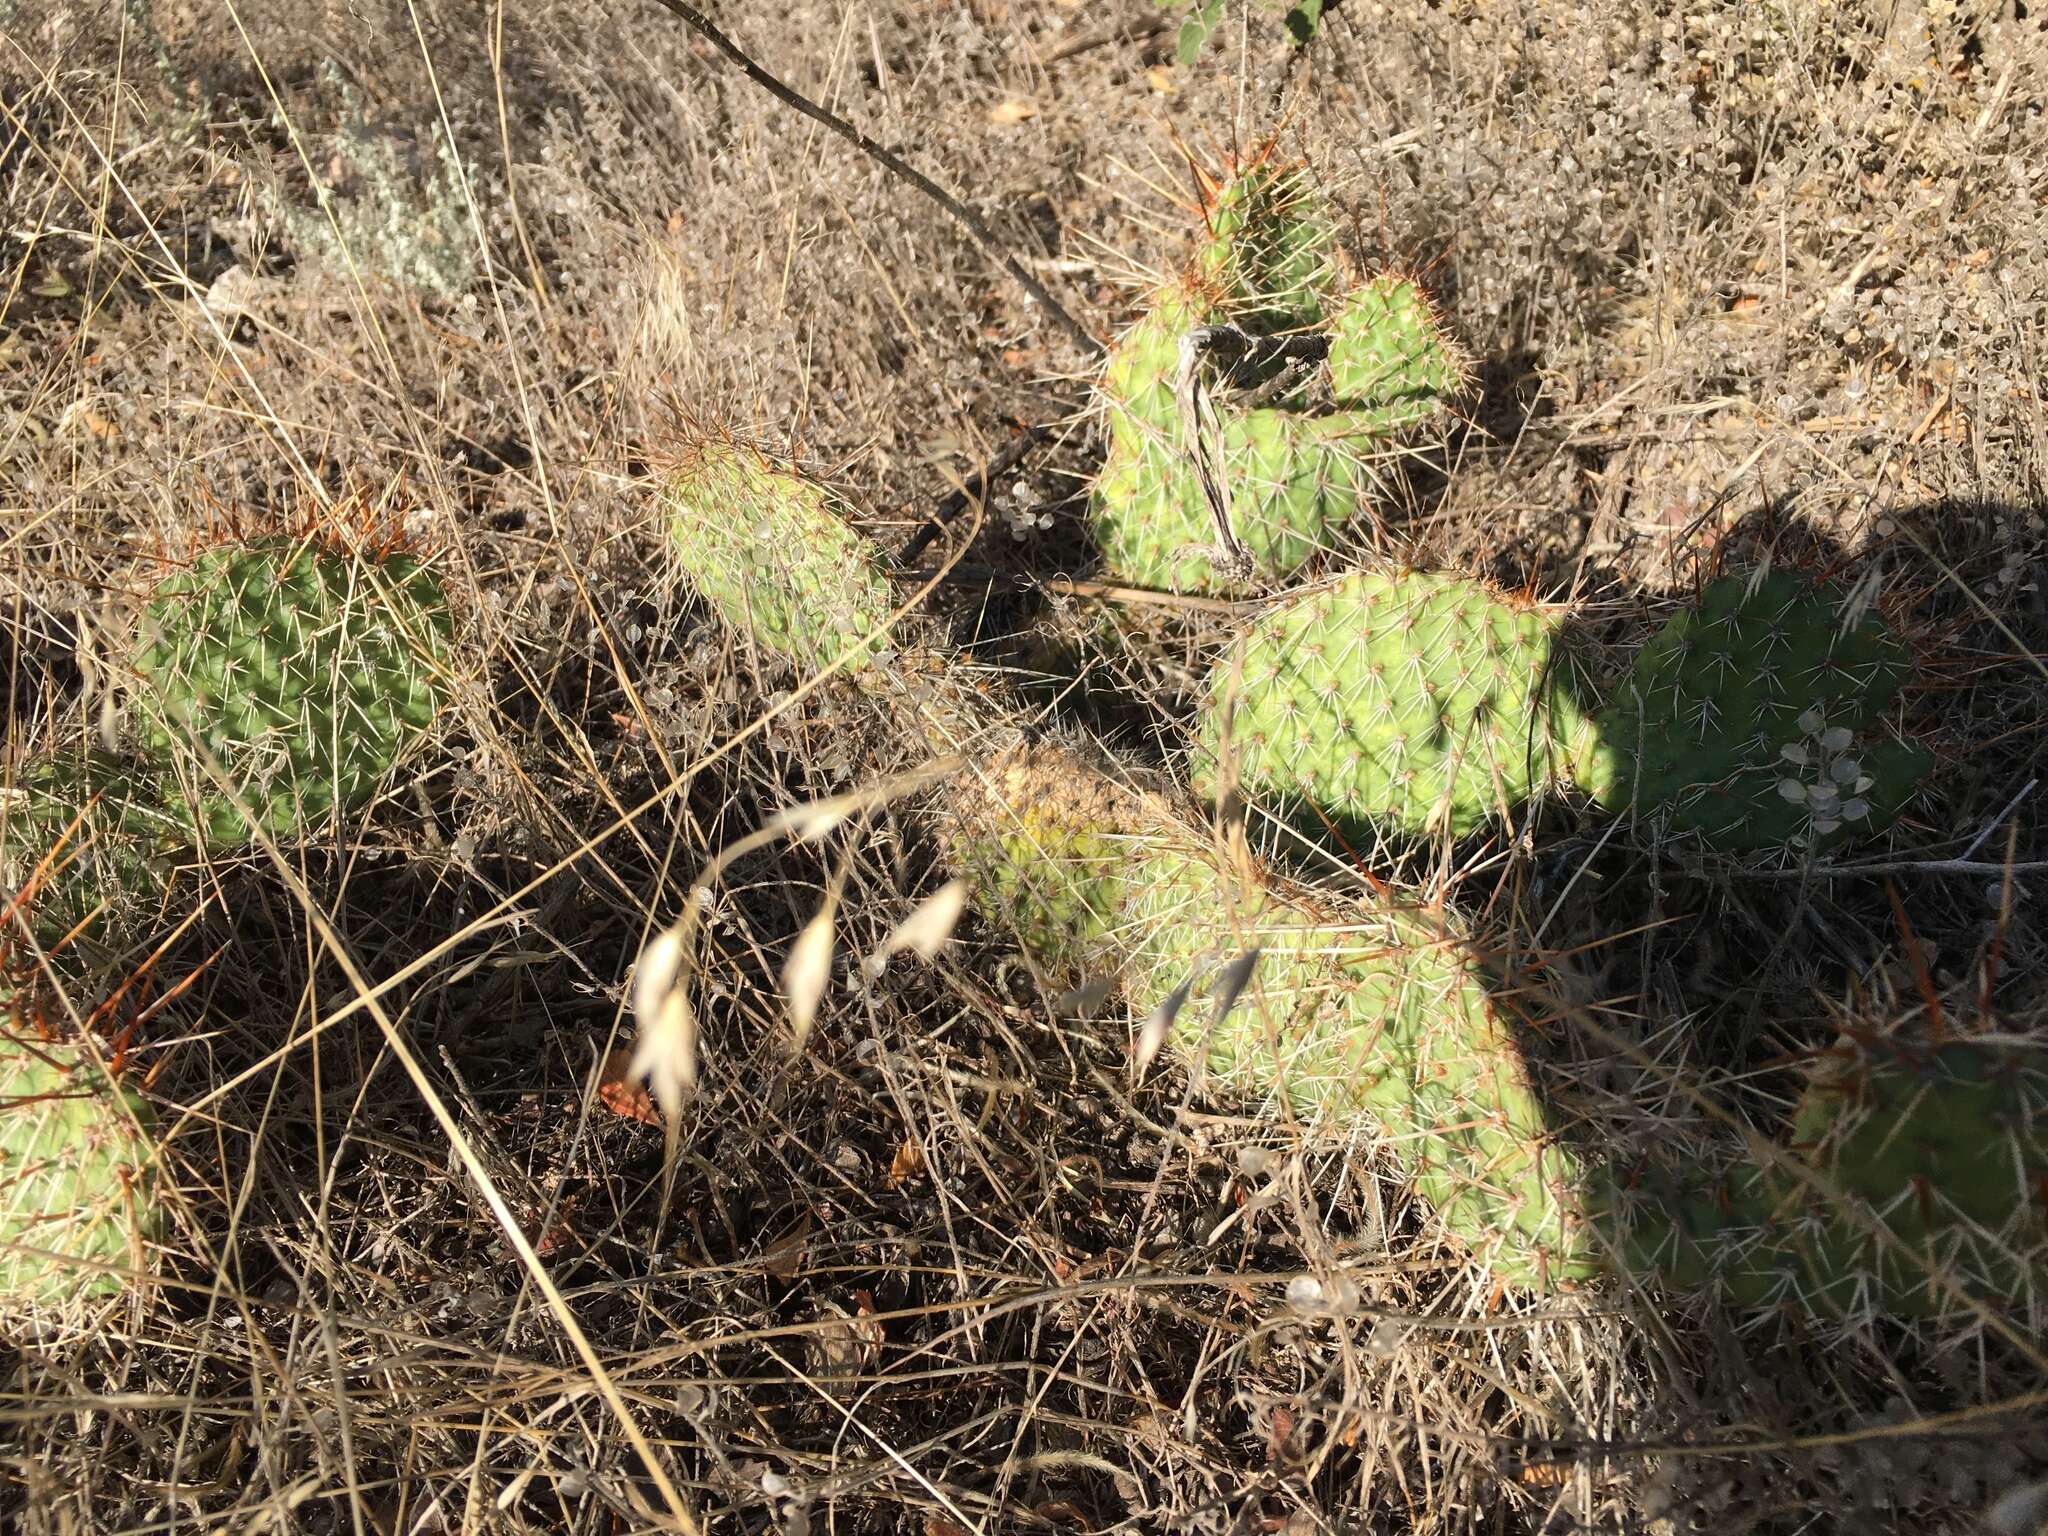 Image of hairspine pricklypear